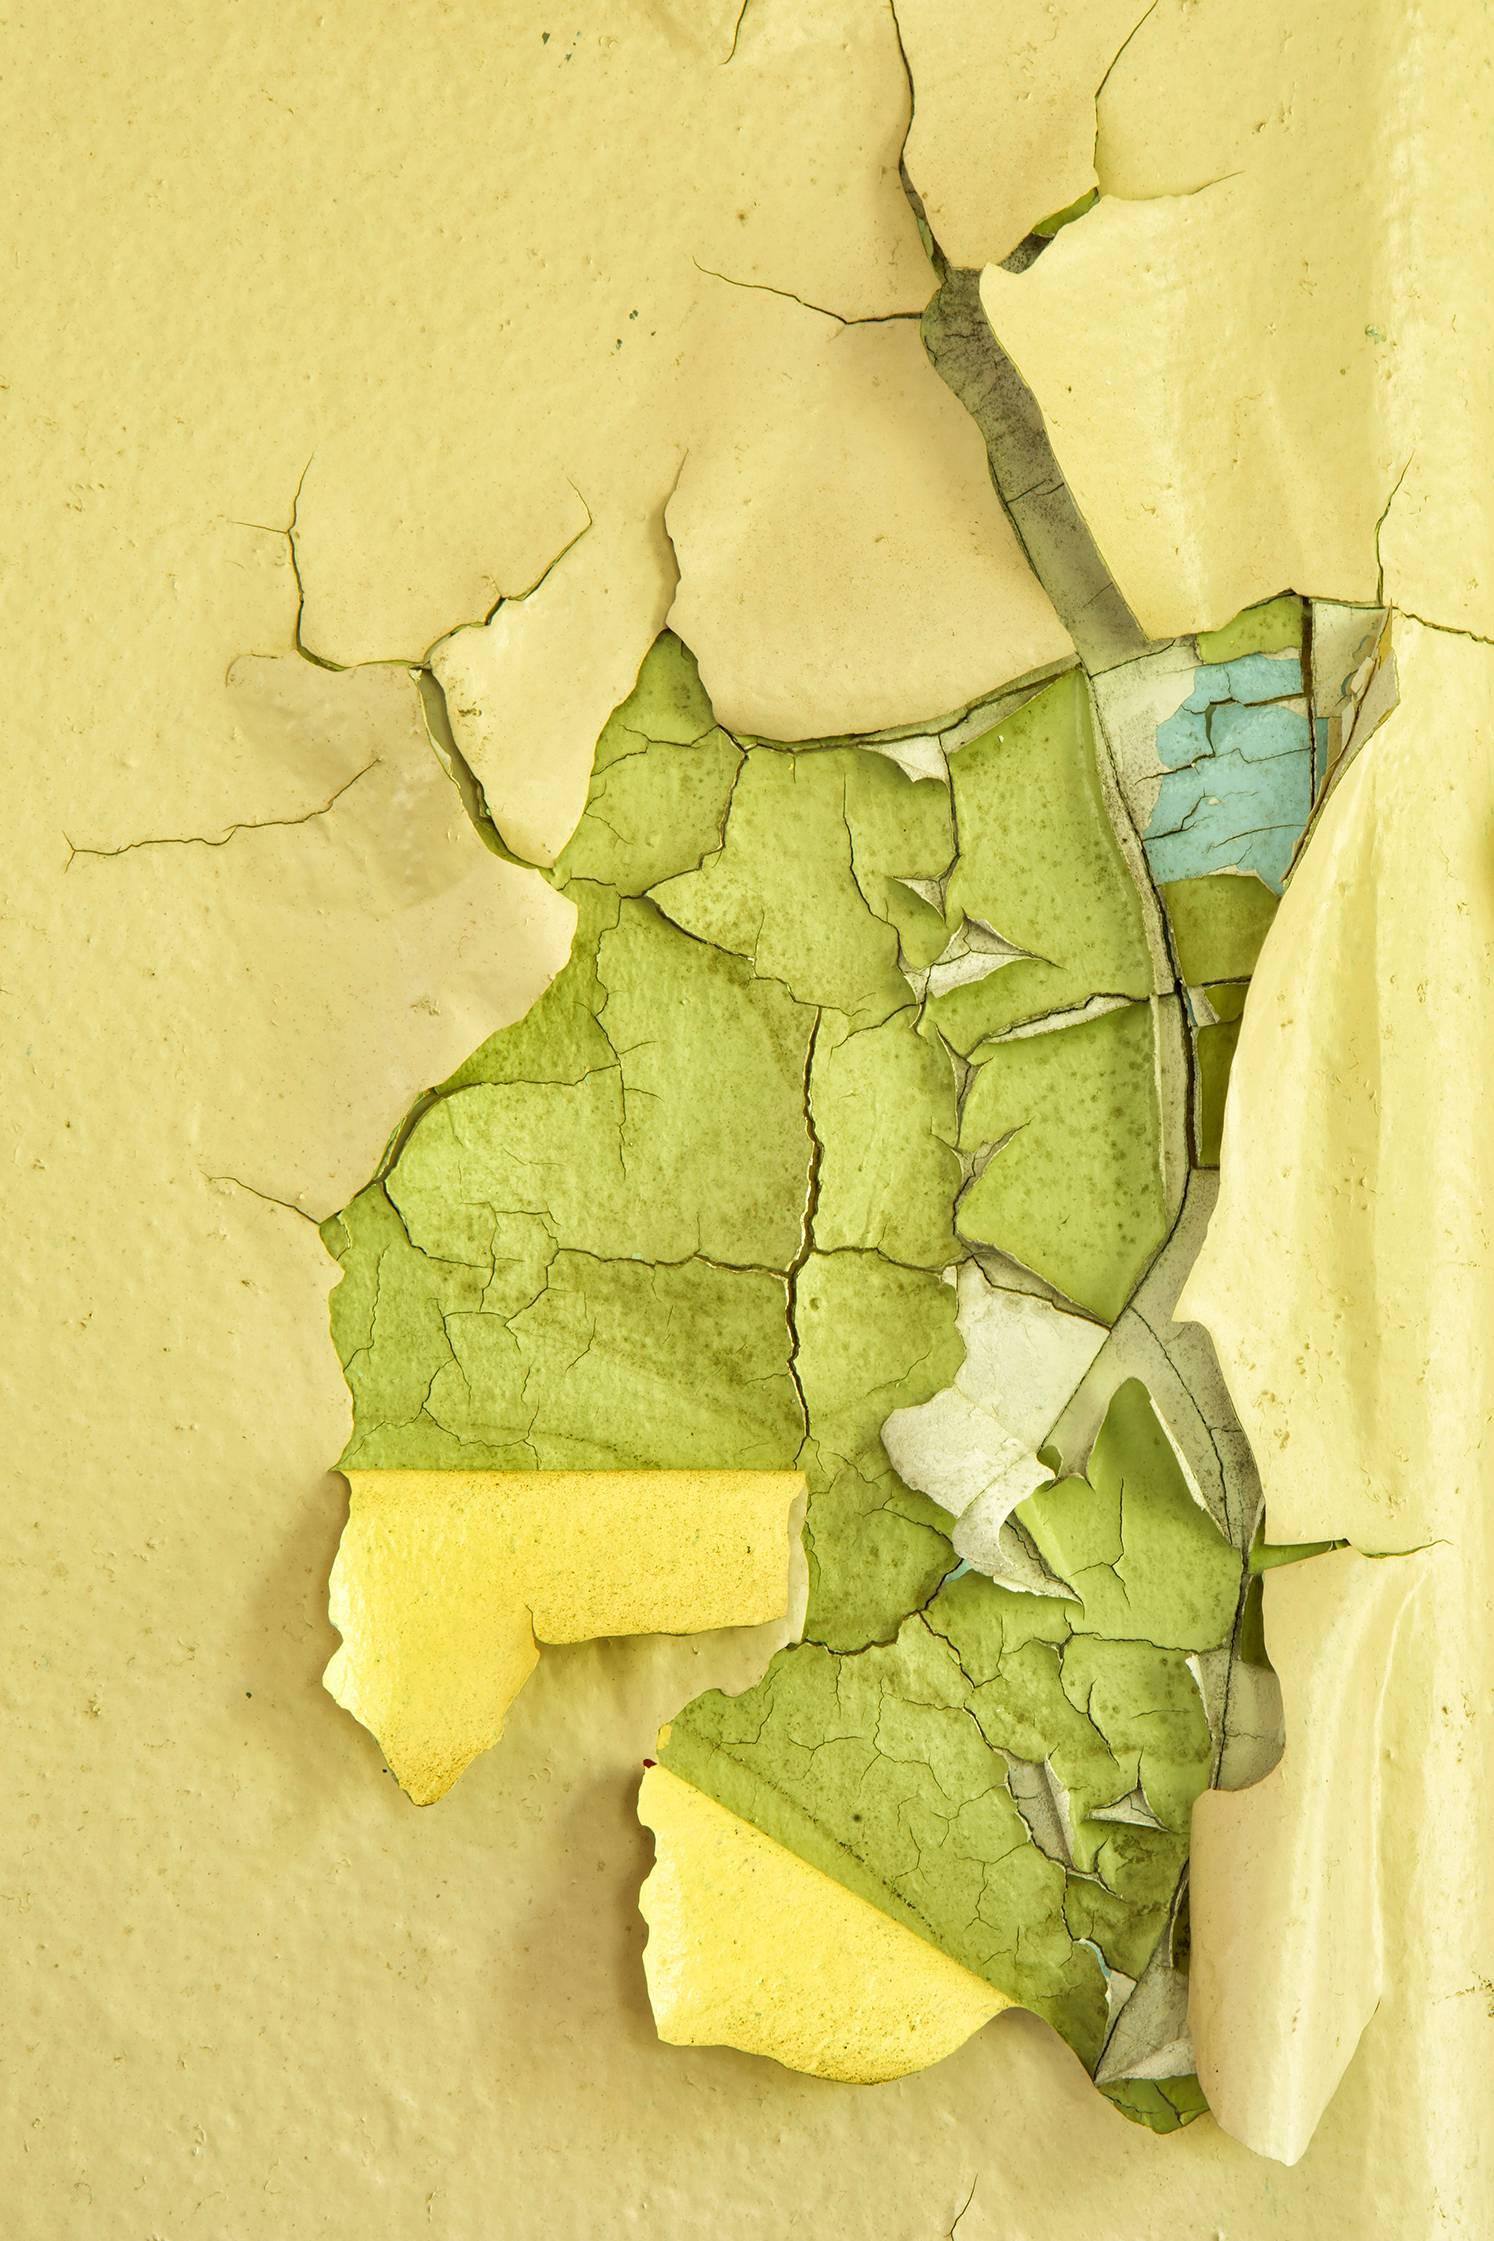 Rebecca Skinner Color Photograph - "Reveal", abstract, metal print, peeling paint, yellow, green, color photograph